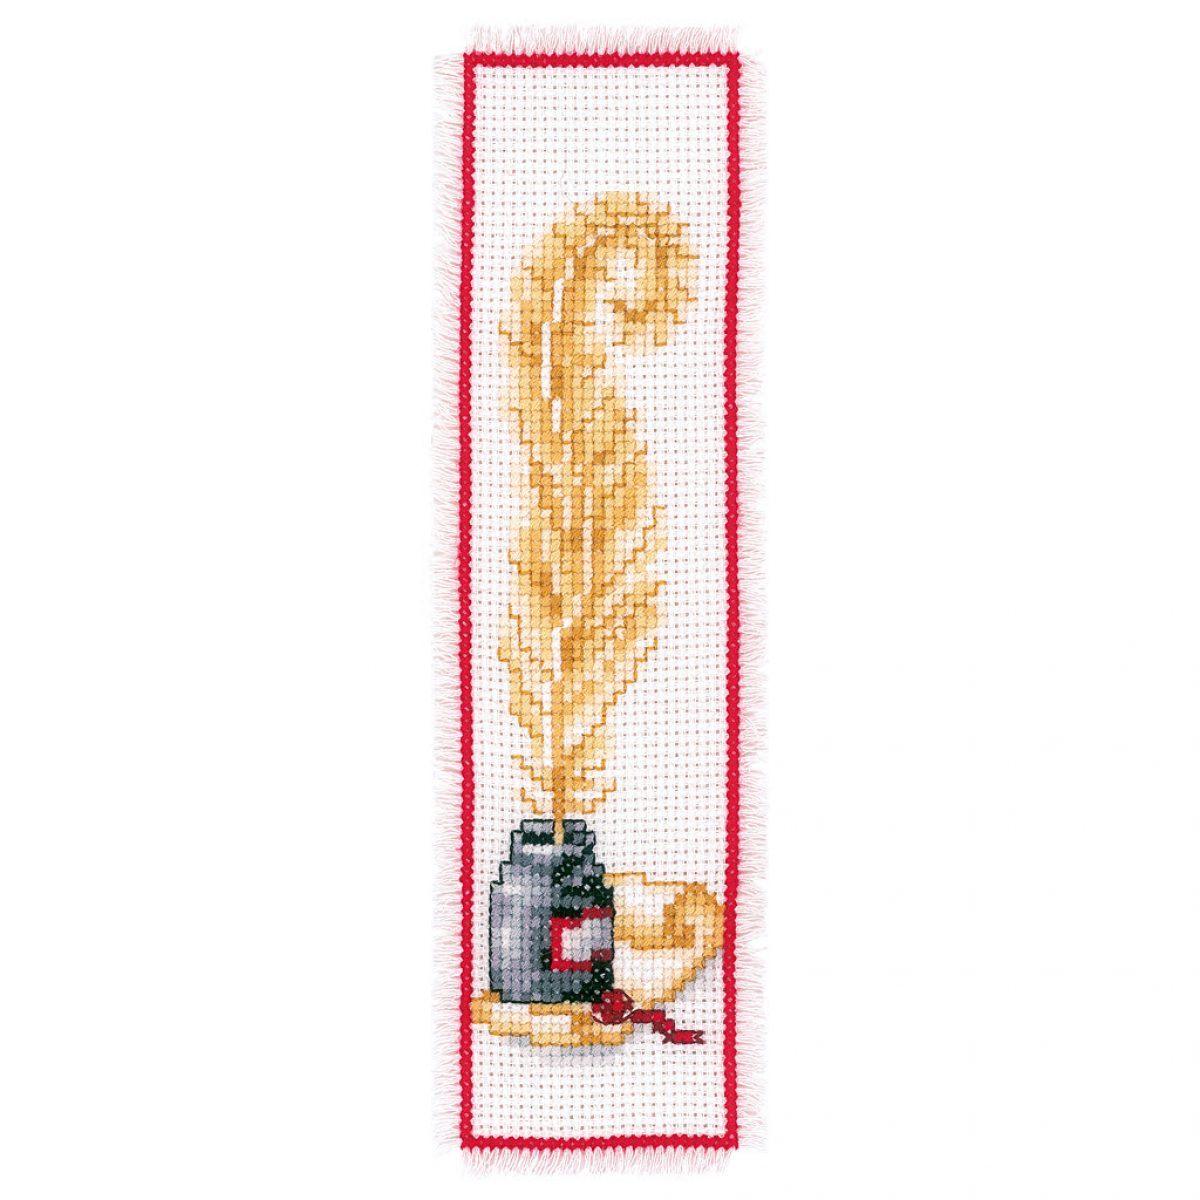 Vervaco Counted Cross Stitch Kit - Blue Feathers Bookmarks